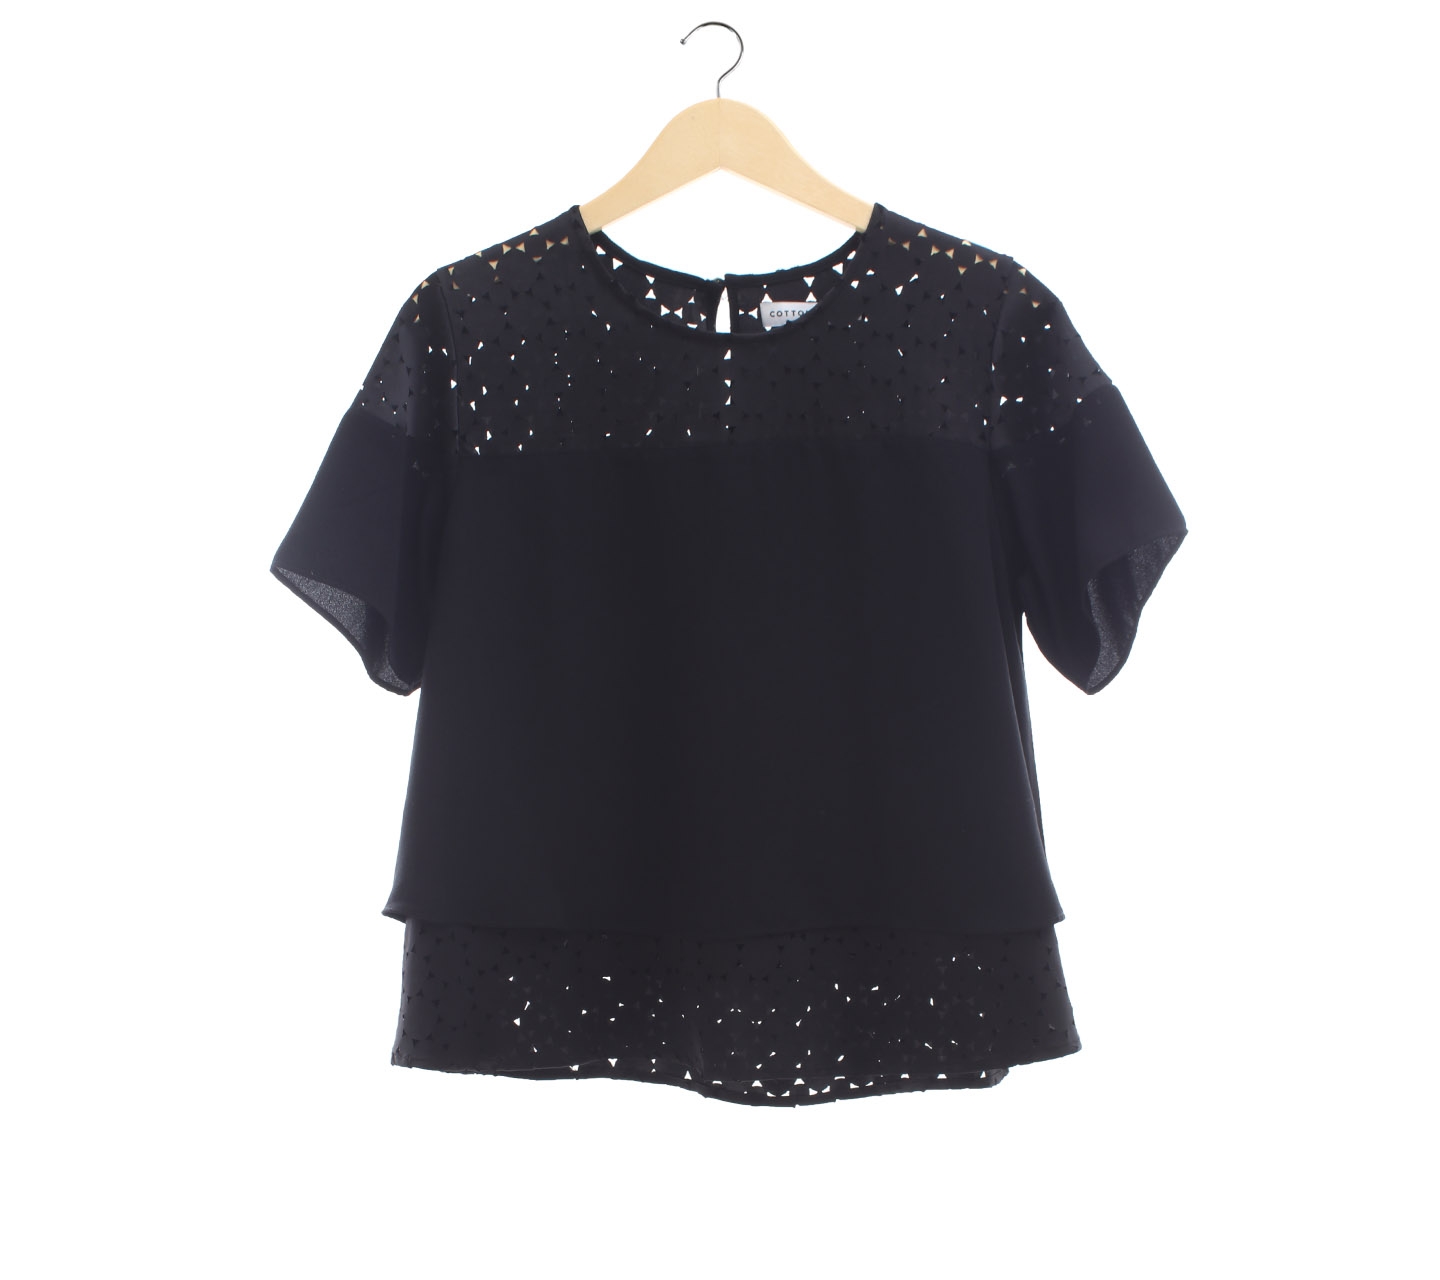 Cotton Ink Black Perforated Blouse